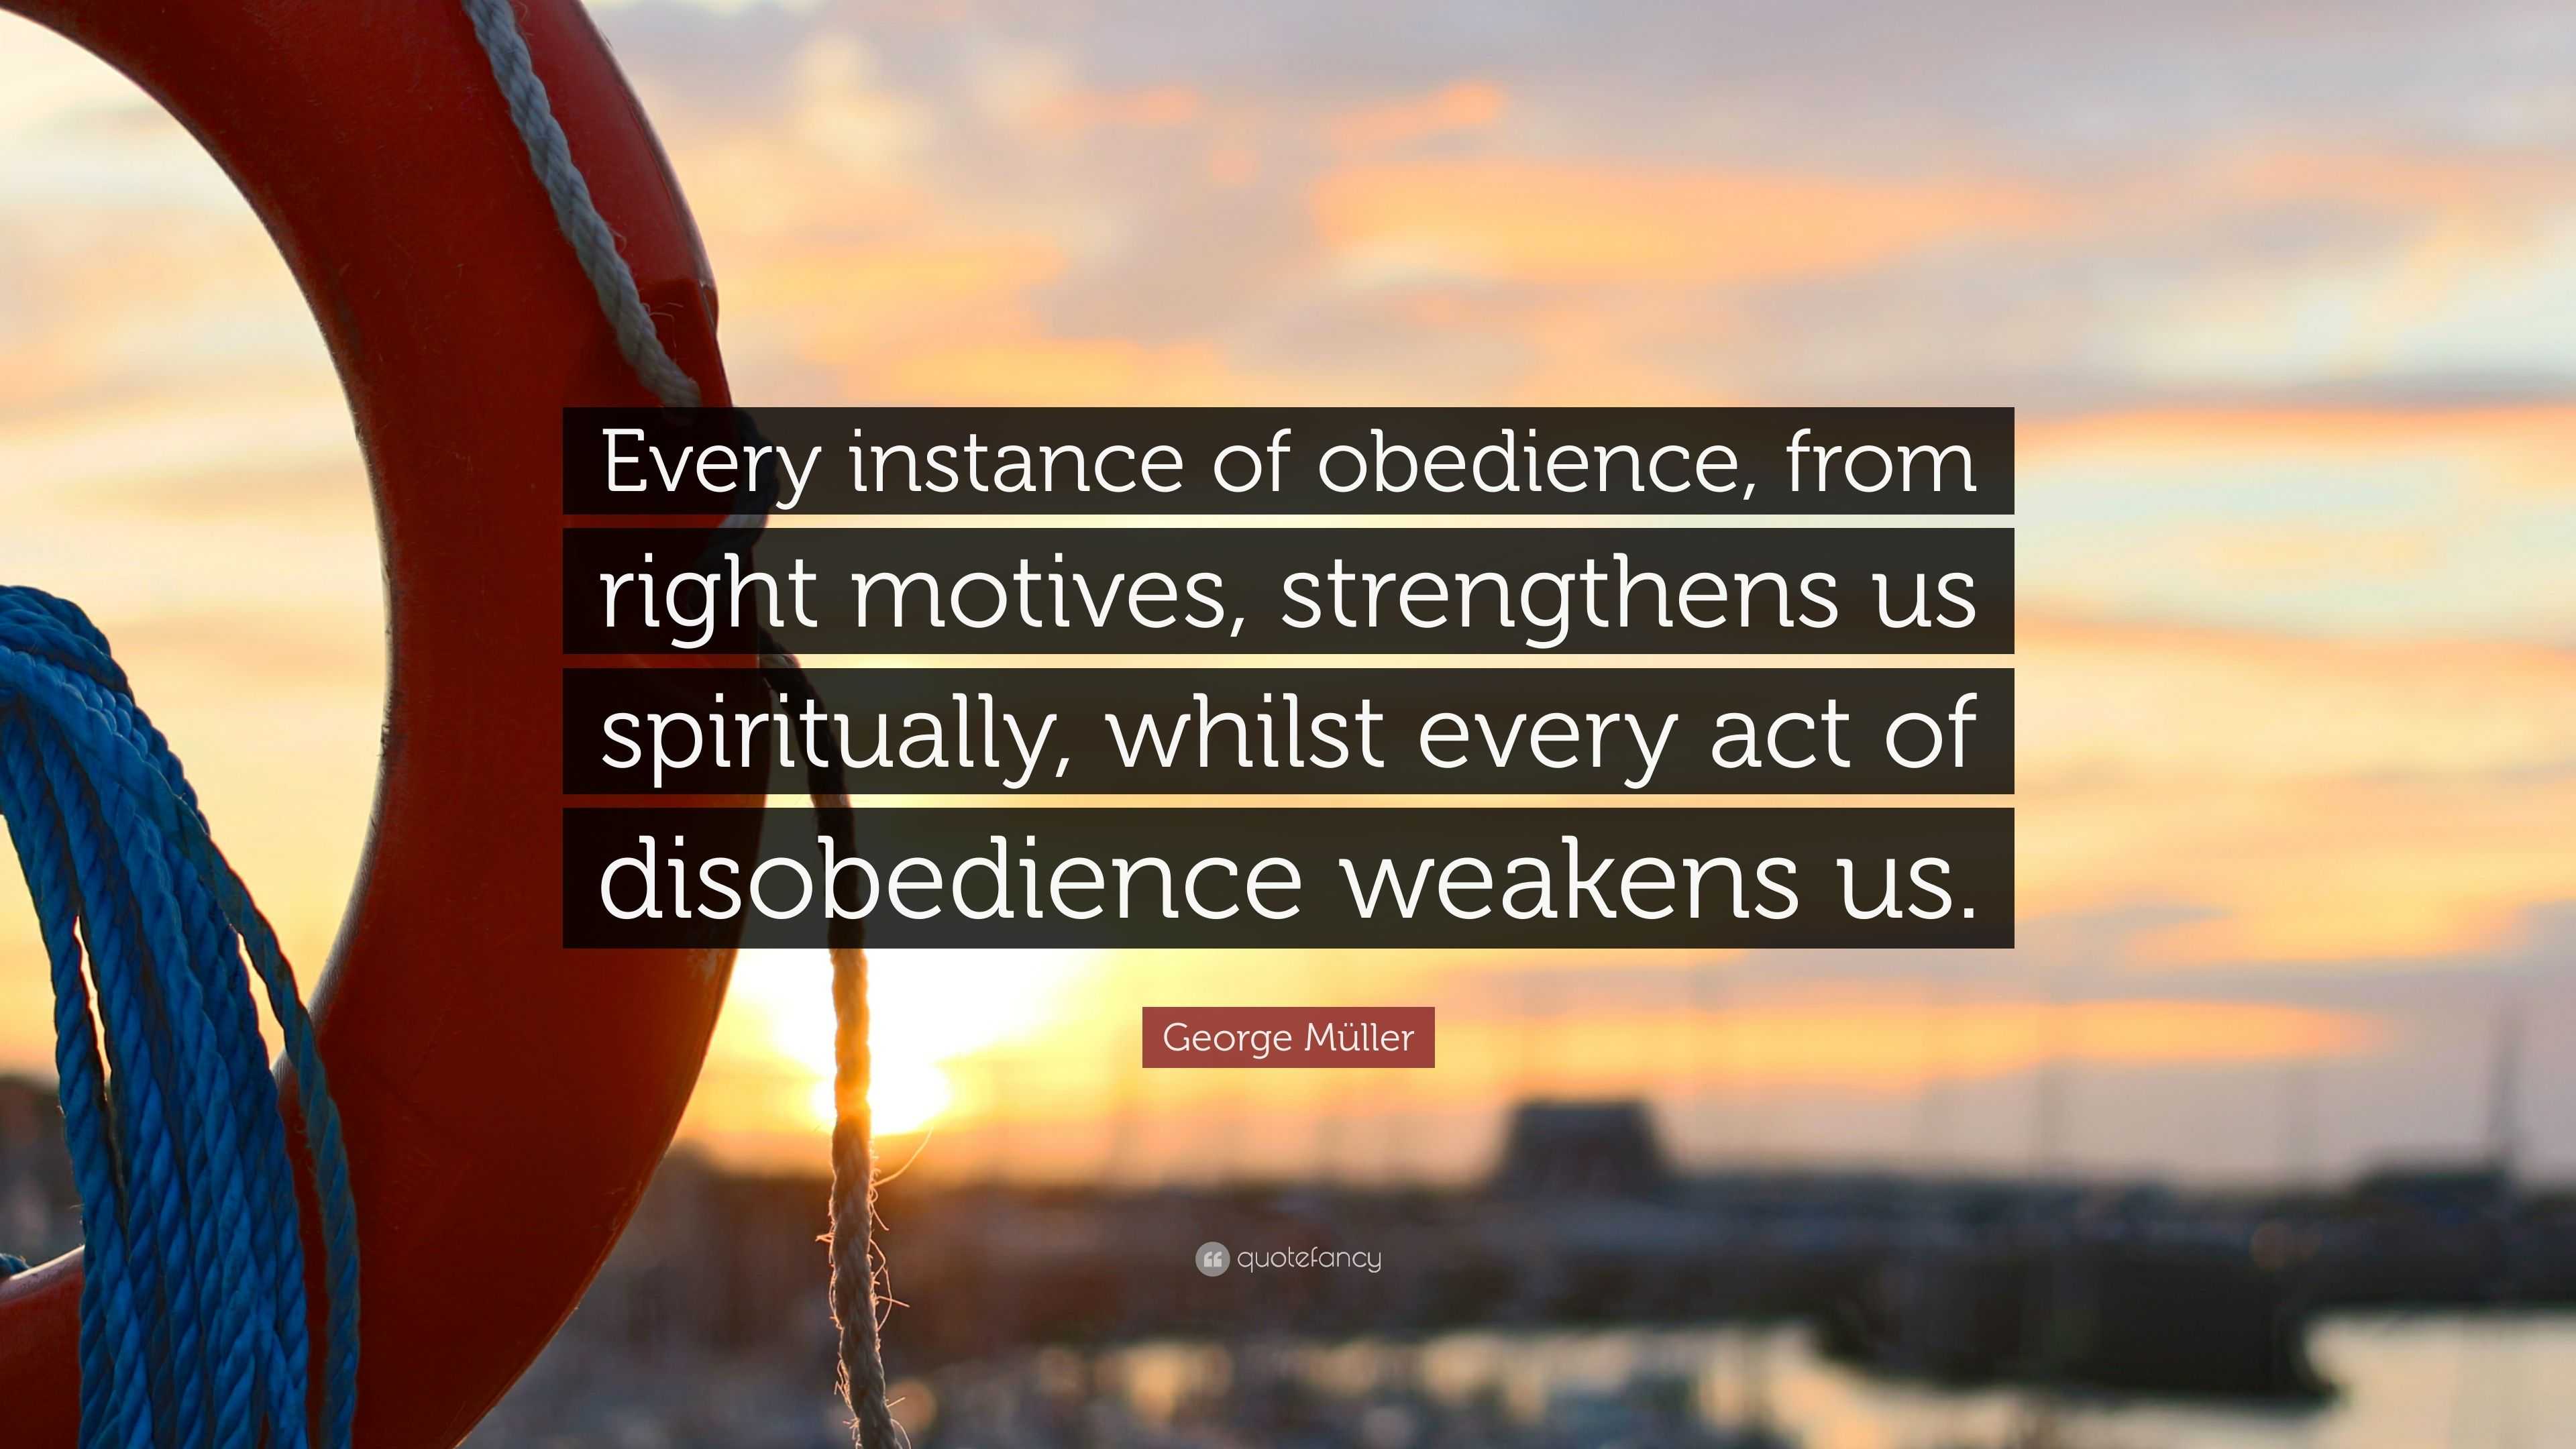 George Müller Quote: “Every instance of obedience, from right motives